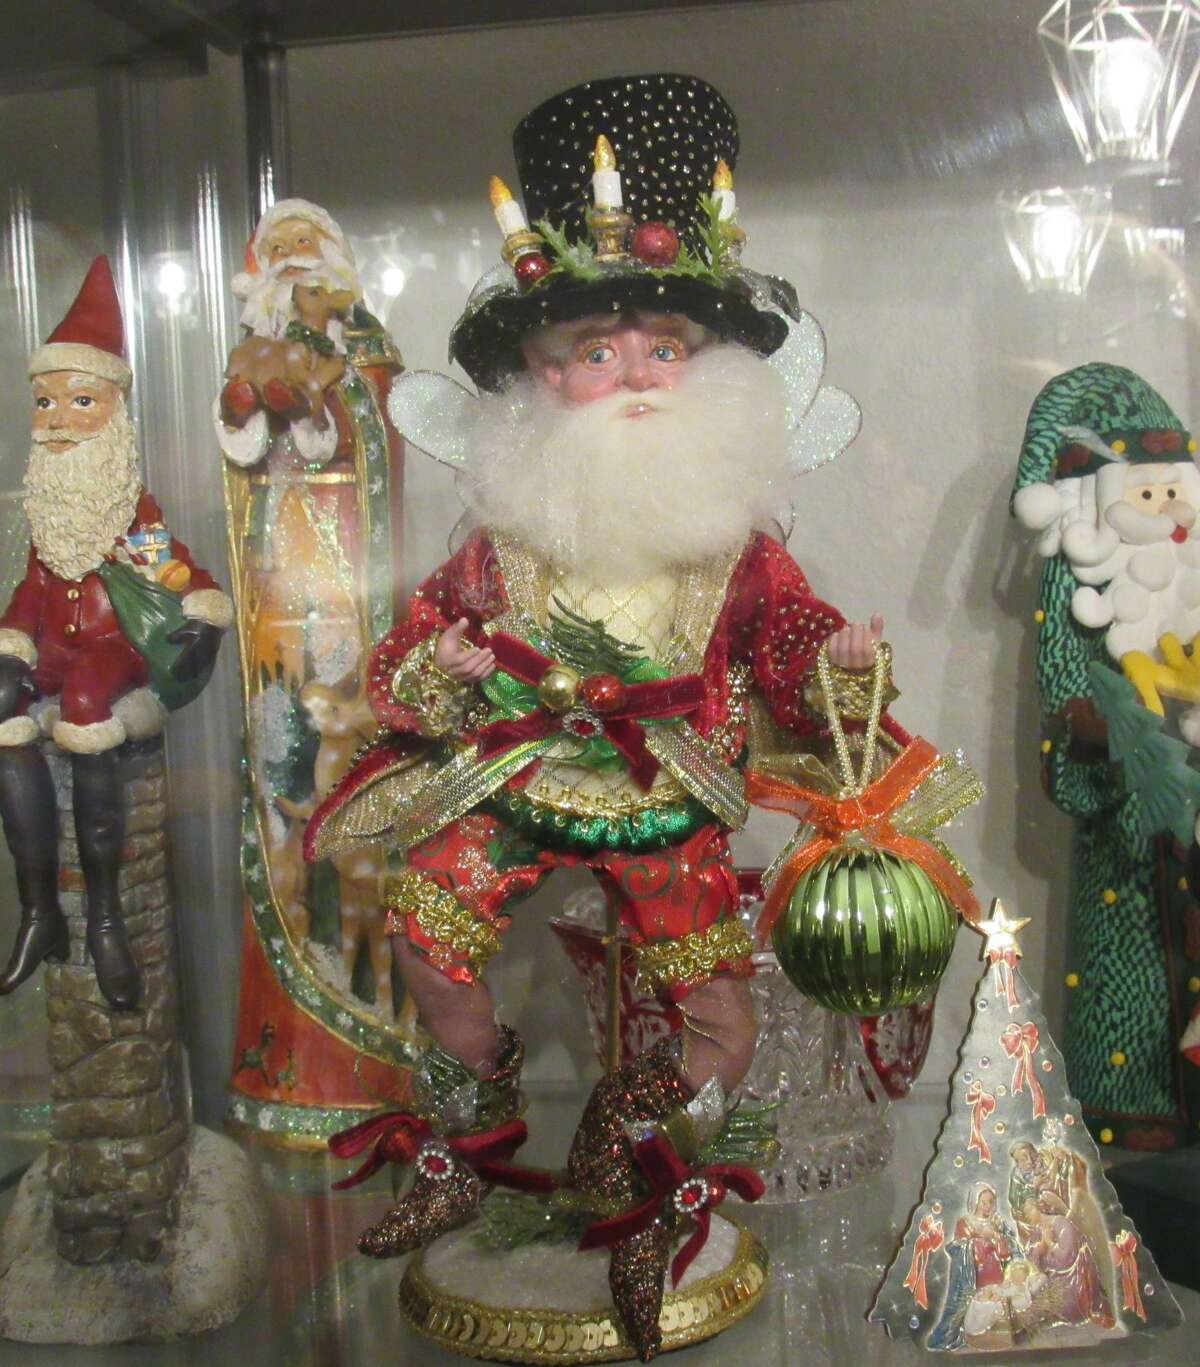 One of the newest Santas in the MacLaughlin's collection is this winged, fairy-like Santa. 